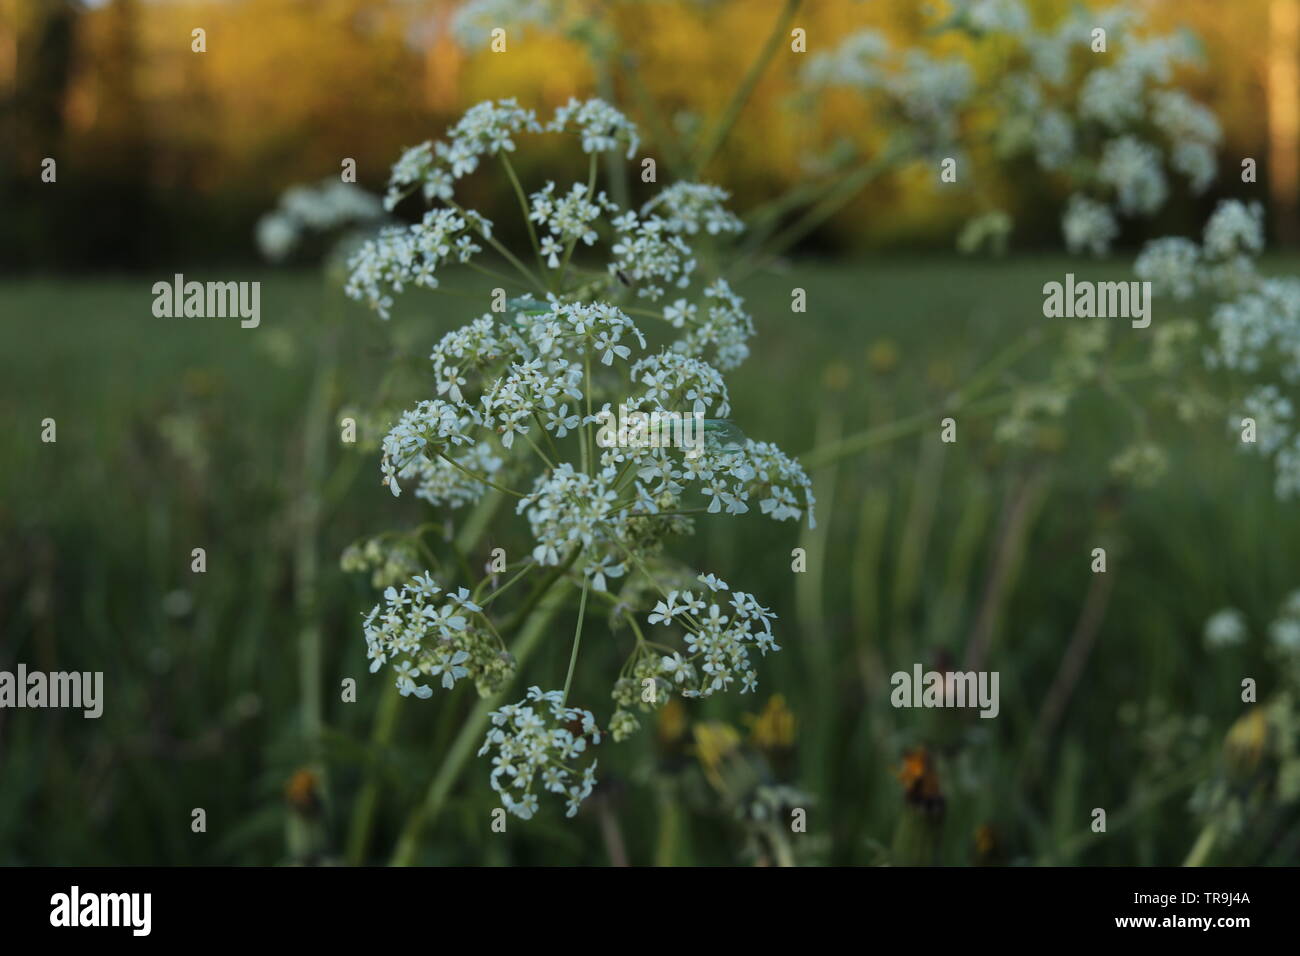 A close-up of a white perky flower on a green field at sunset. Stock Photo